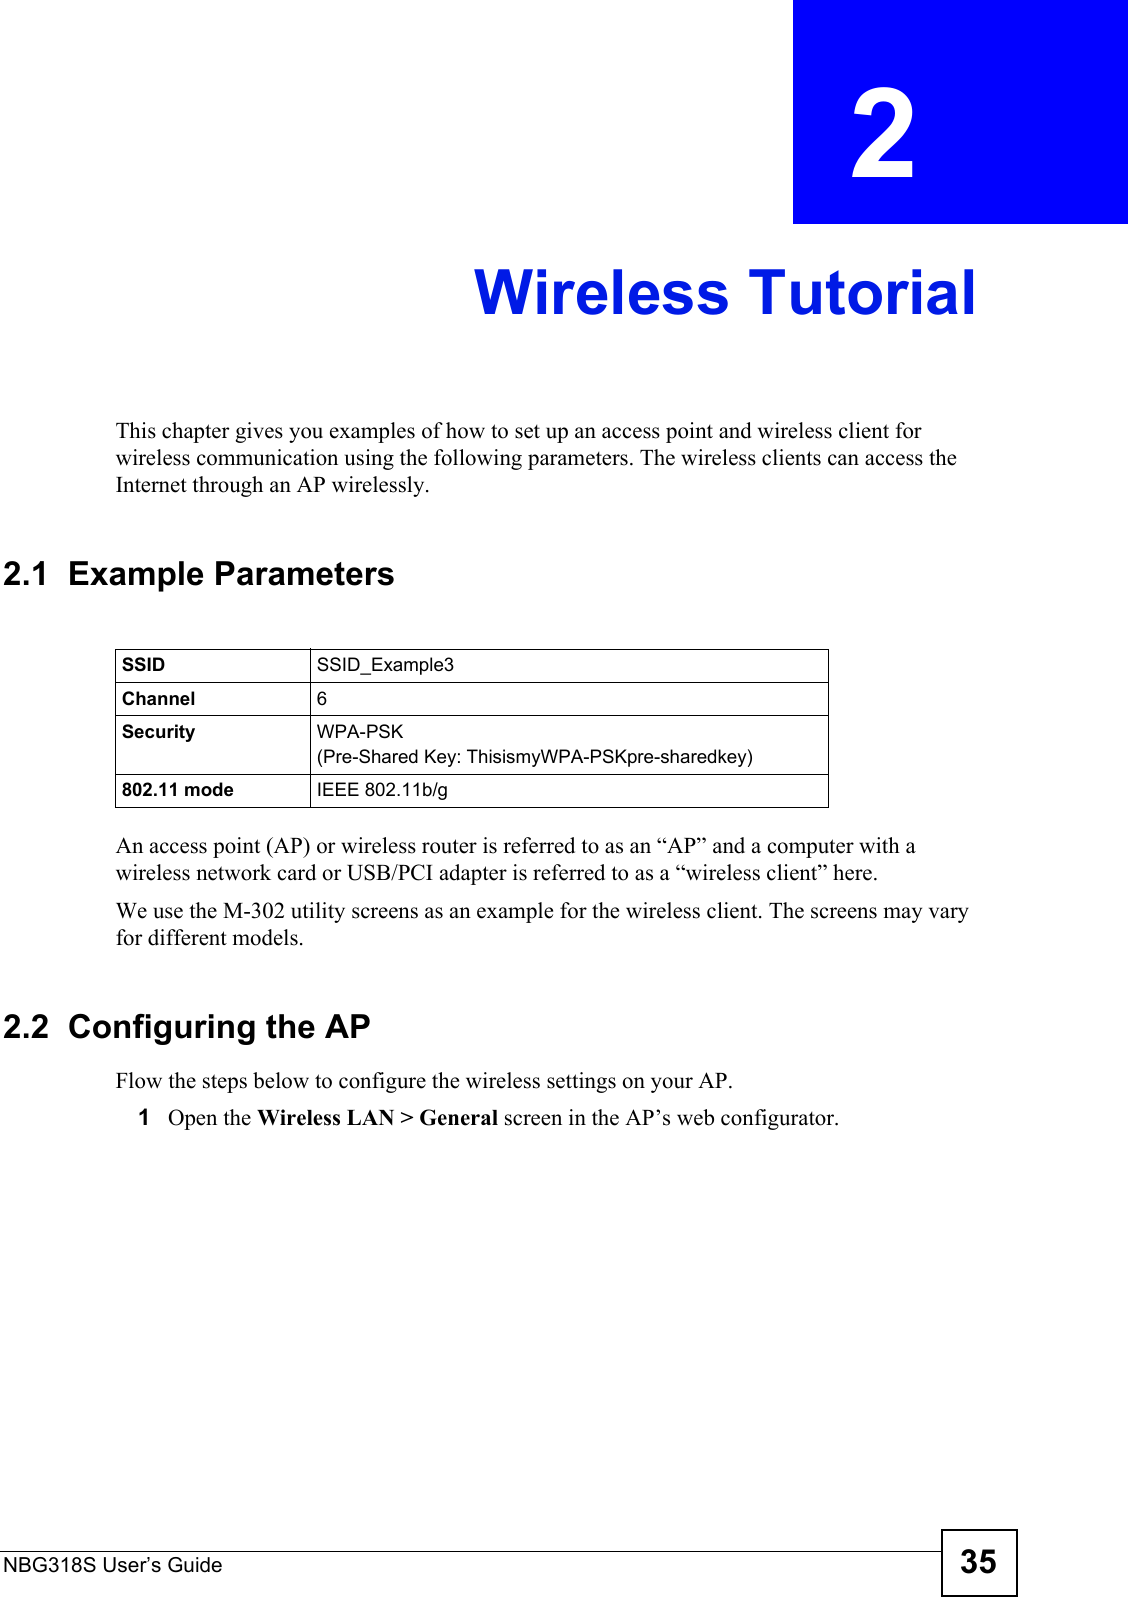 NBG318S User’s Guide 35CHAPTER  2 Wireless TutorialThis chapter gives you examples of how to set up an access point and wireless client for wireless communication using the following parameters. The wireless clients can access the Internet through an AP wirelessly.2.1  Example ParametersAn access point (AP) or wireless router is referred to as an “AP” and a computer with a wireless network card or USB/PCI adapter is referred to as a “wireless client” here.We use the M-302 utility screens as an example for the wireless client. The screens may vary for different models.2.2  Configuring the APFlow the steps below to configure the wireless settings on your AP.1Open the Wireless LAN &gt; General screen in the AP’s web configurator.SSID SSID_Example3Channel 6Security  WPA-PSK(Pre-Shared Key: ThisismyWPA-PSKpre-sharedkey)802.11 mode IEEE 802.11b/g